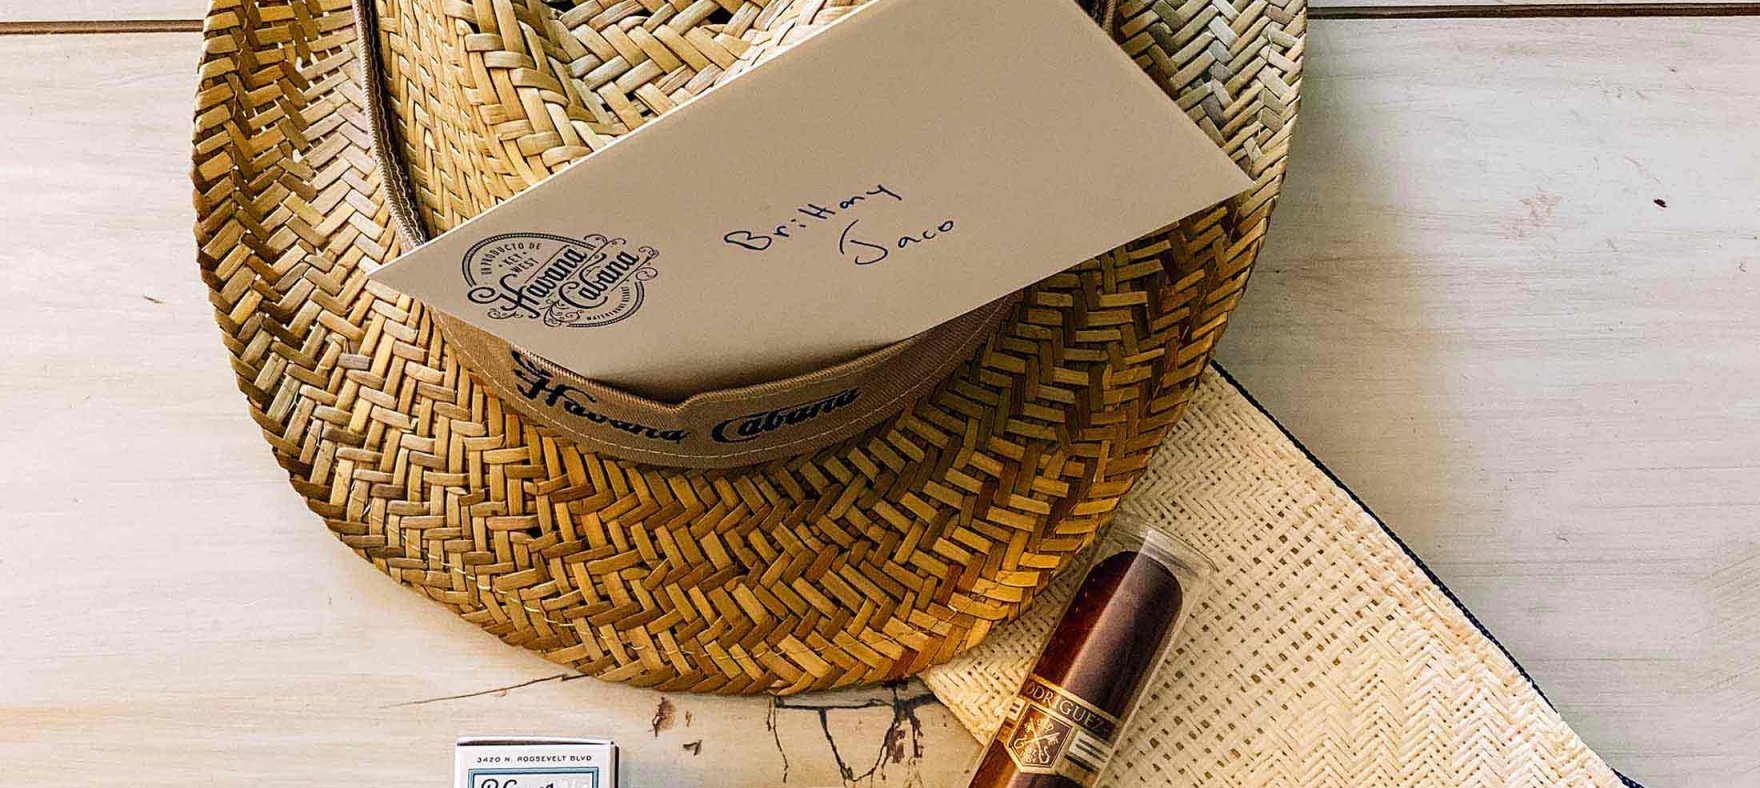 A matchbox, cigar cutter, a Cuban cigar and a HC initialled napkin placed in front of a straw fedora with a letter